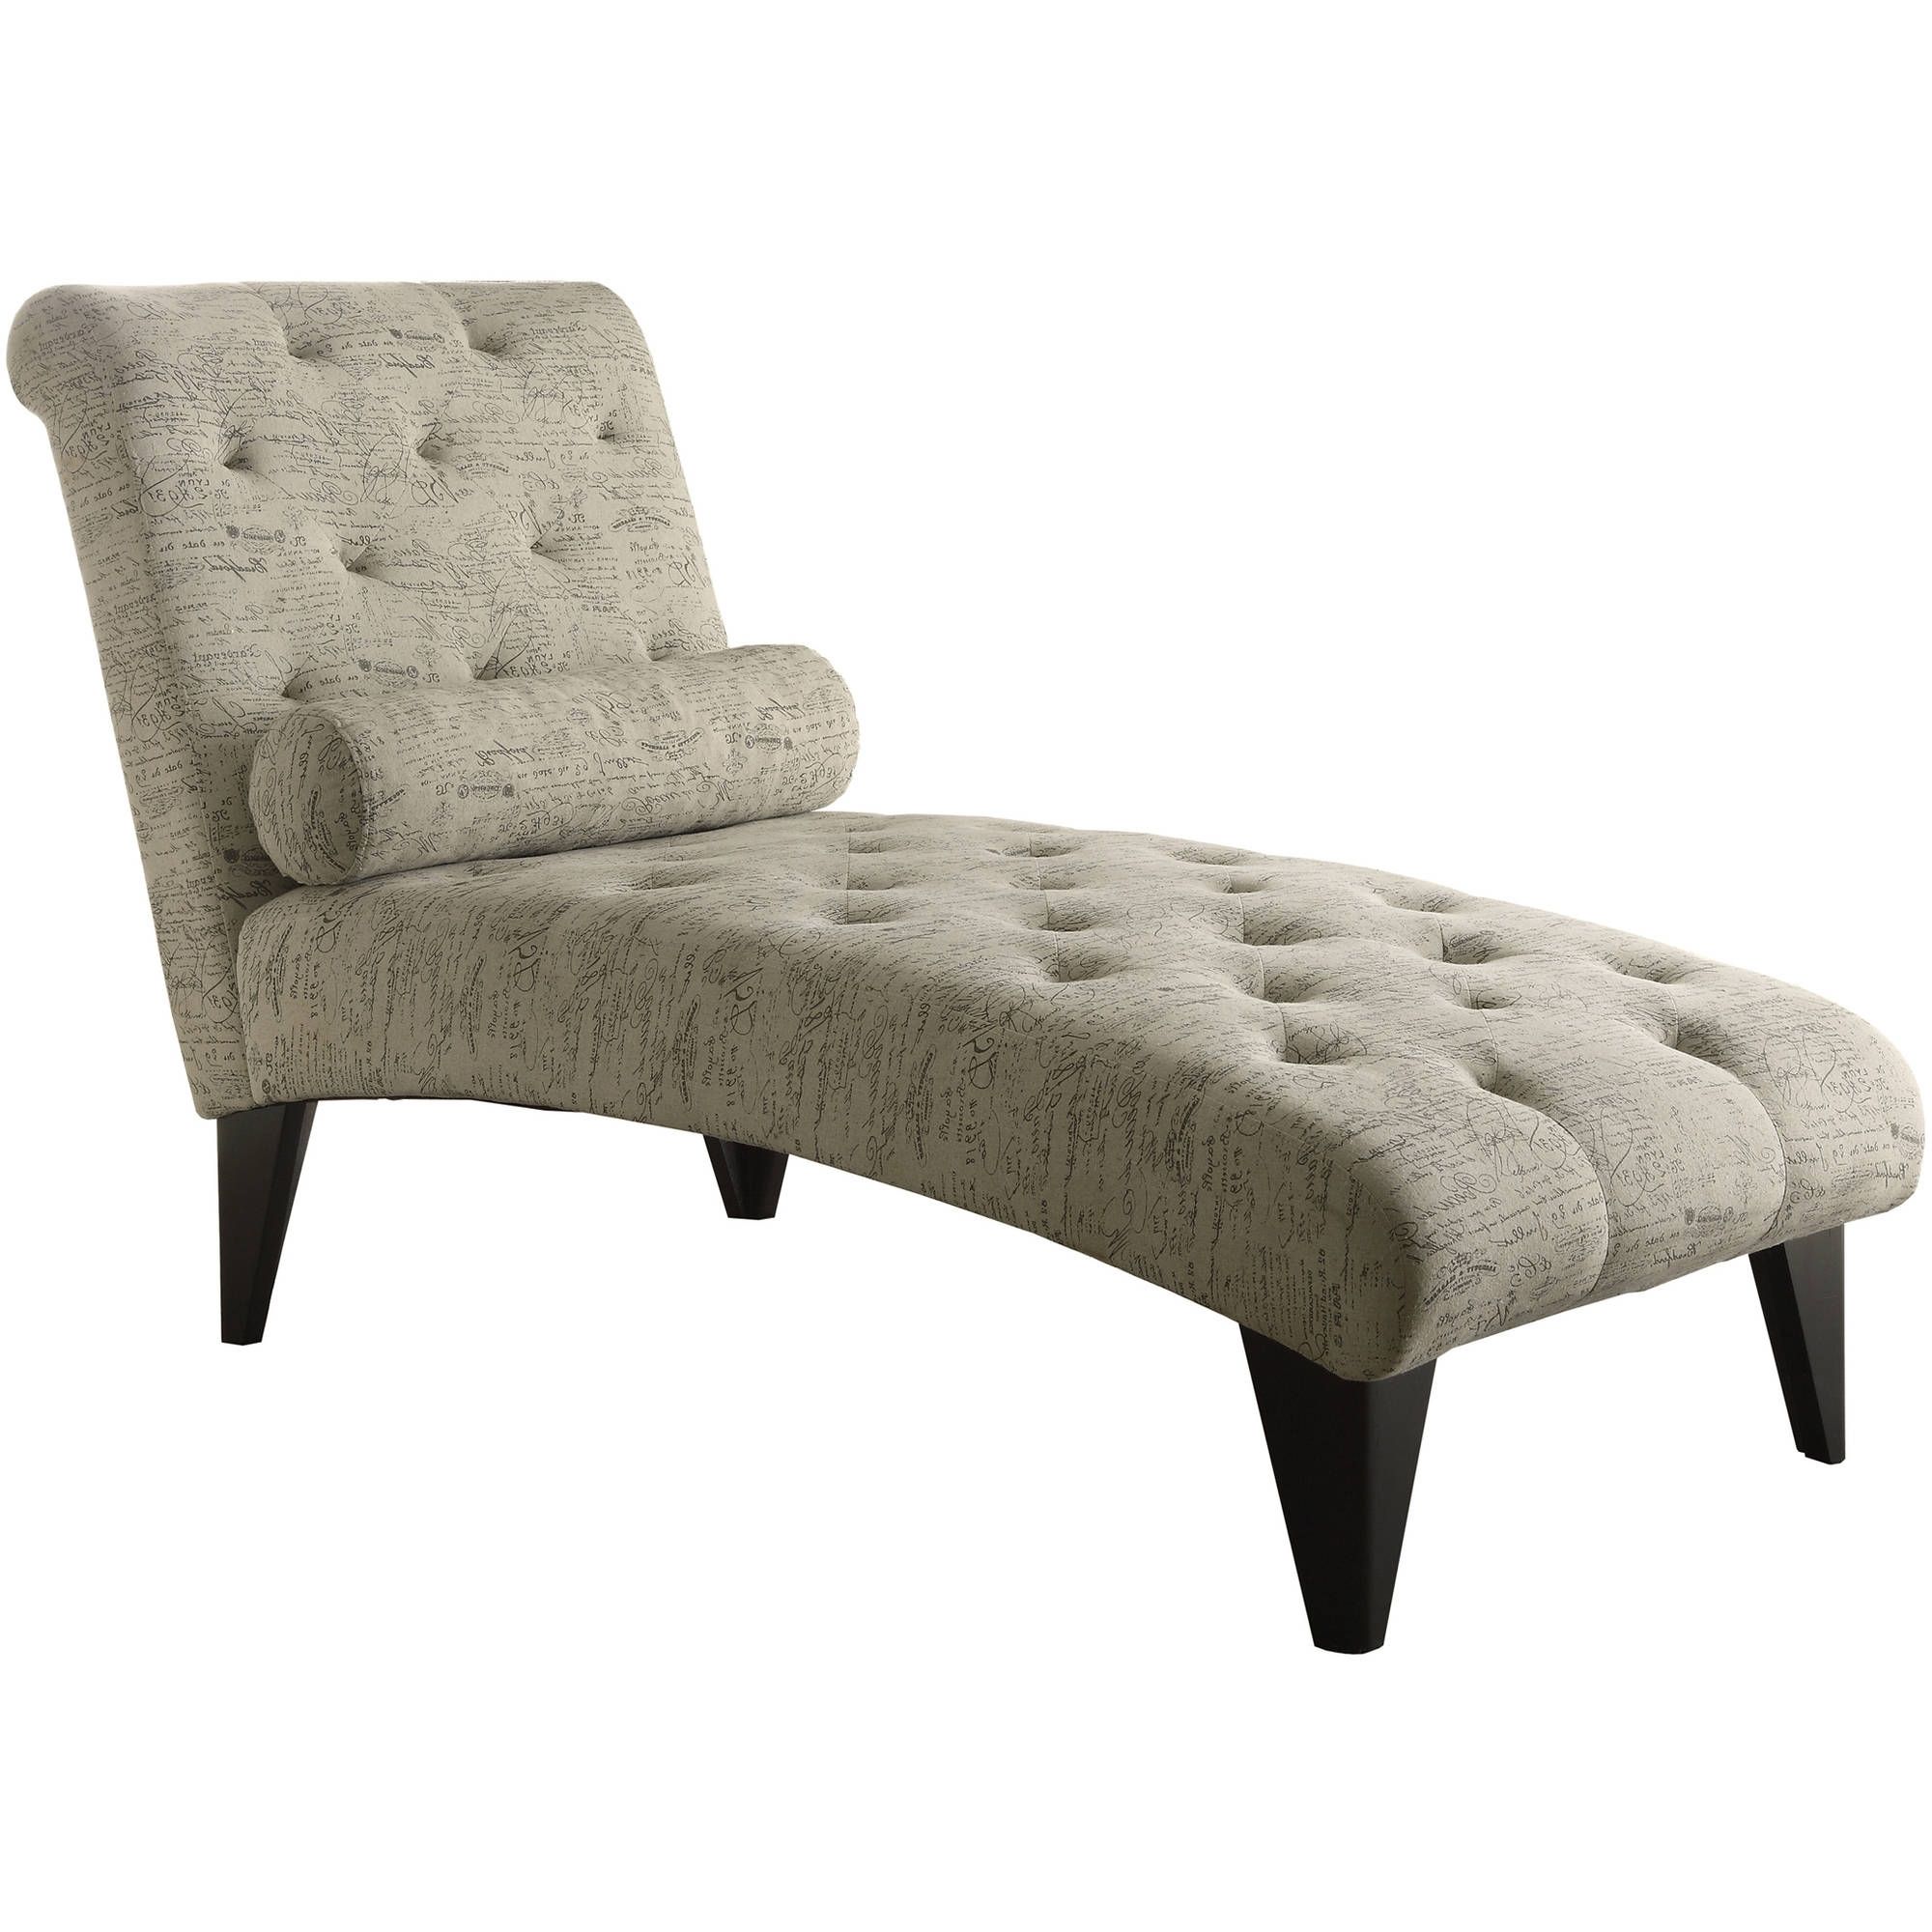 Chaise Lounges – Walmart Intended For Well Known Beige Chaise Lounges (View 11 of 15)